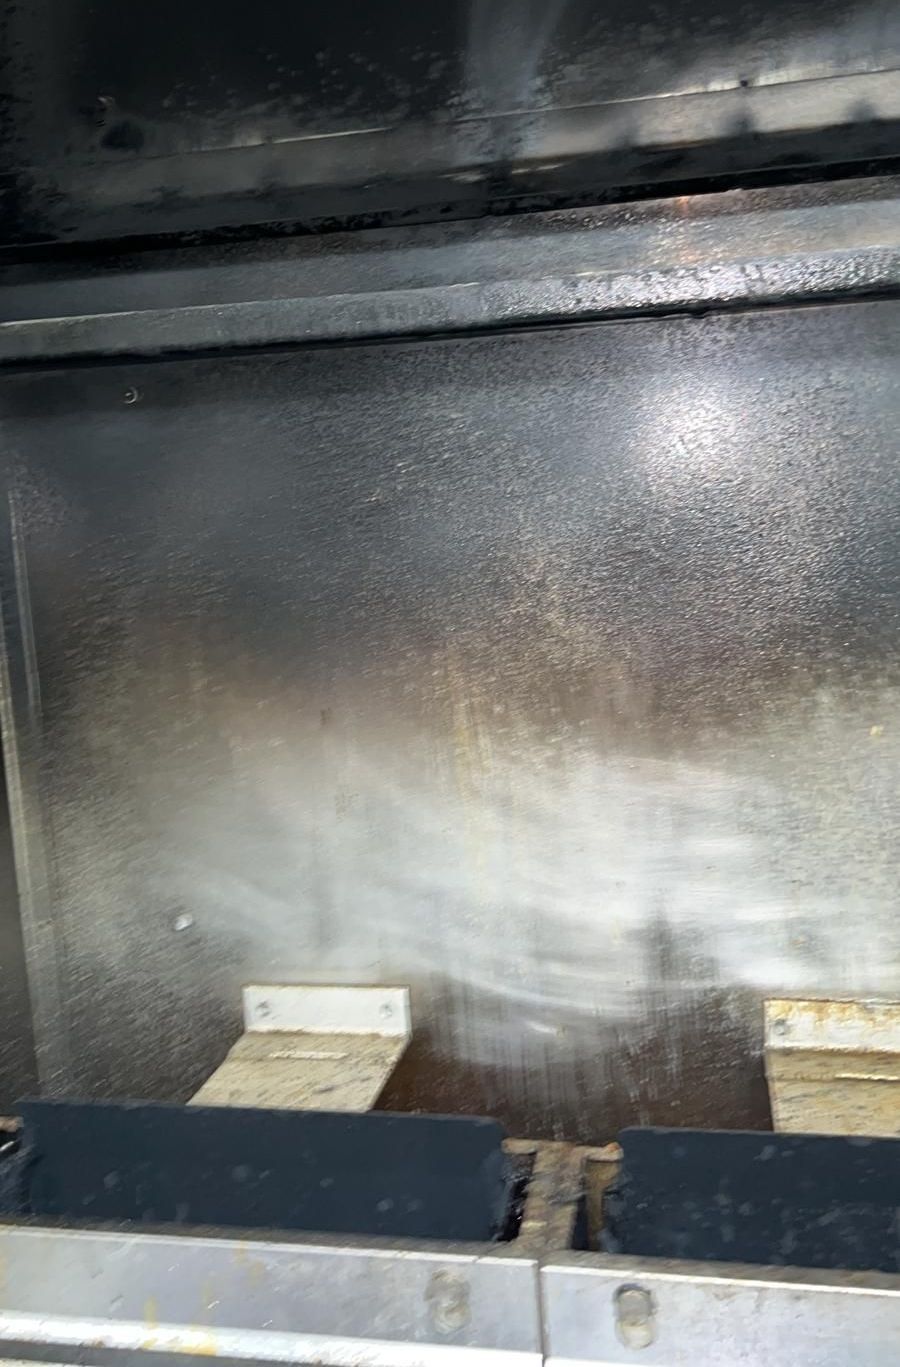 a close up of a dirty stove with a lot of smoke coming out of it .